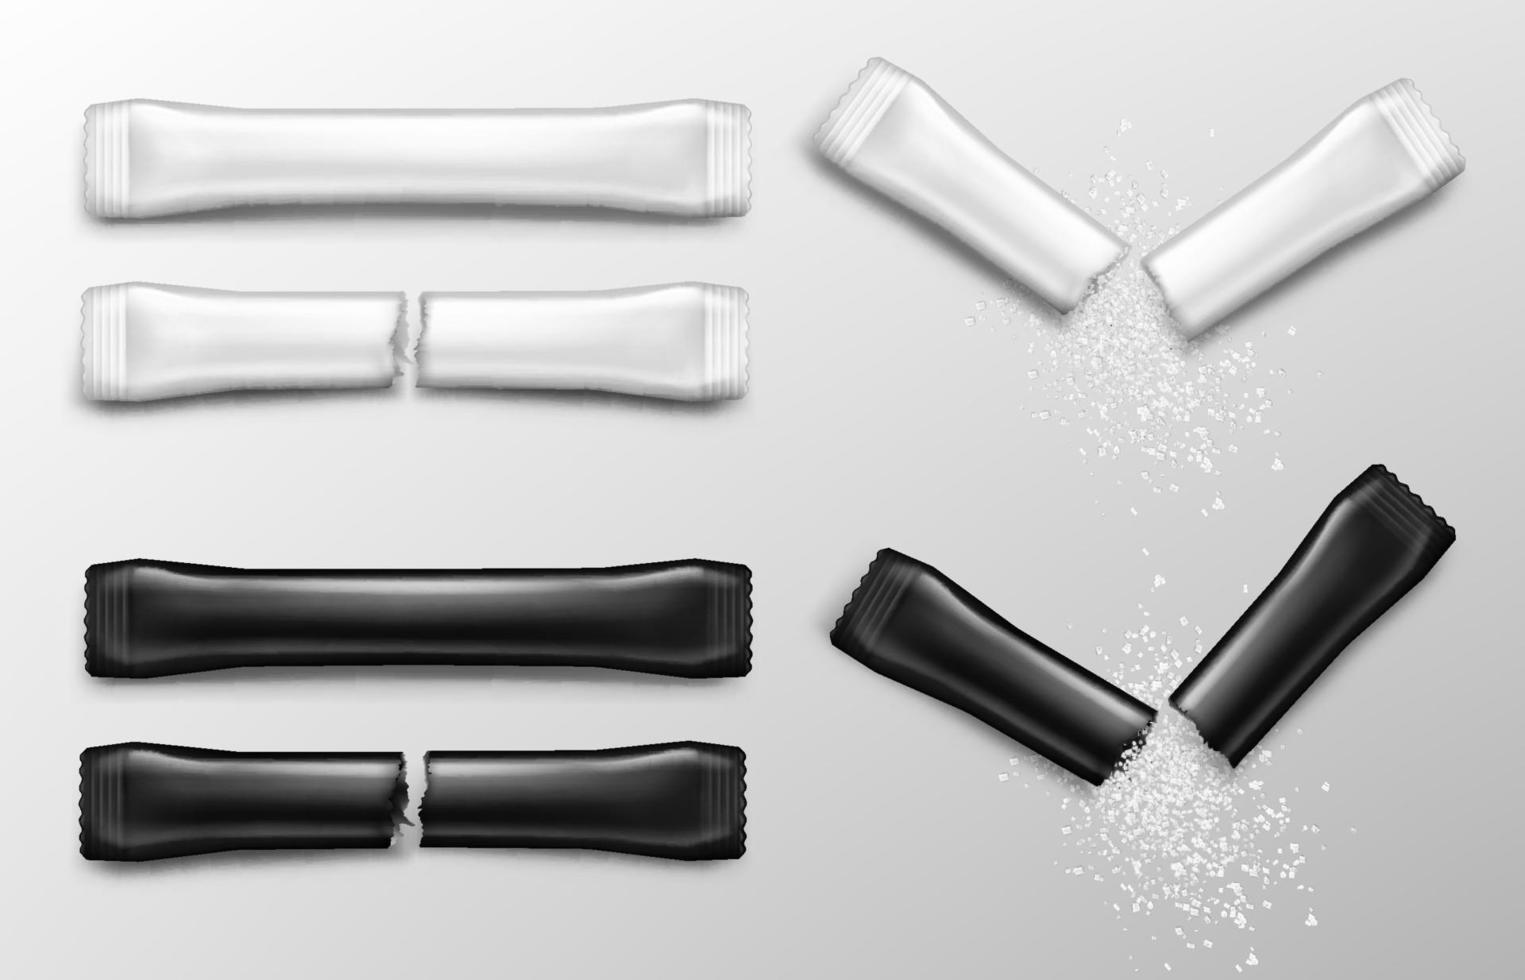 Sugar sticks for coffee in white and black packs vector